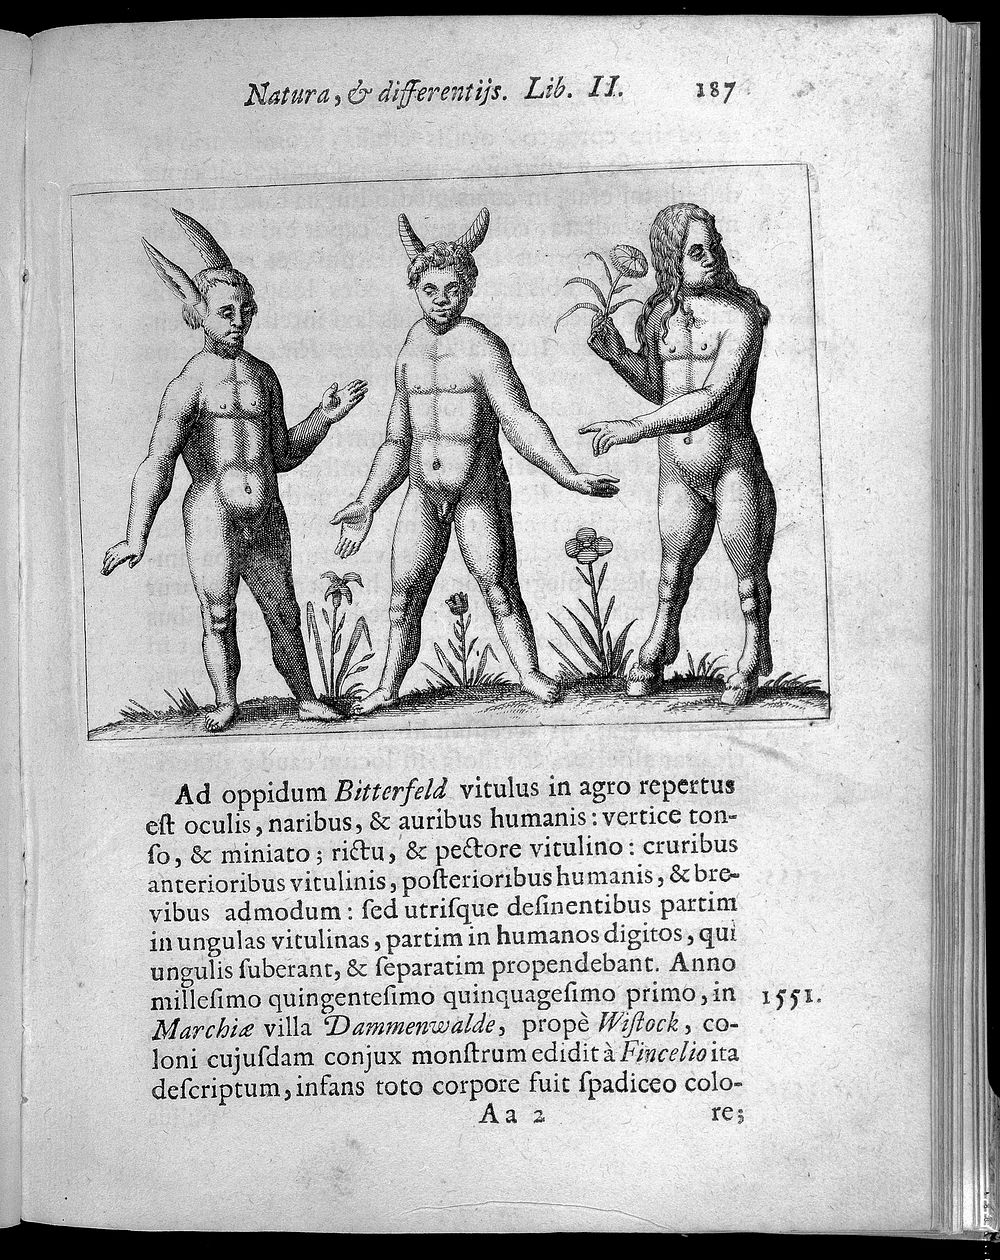 Three figures with abnormalities, one figure has rabbit ears, one has horns and the other one has hooves